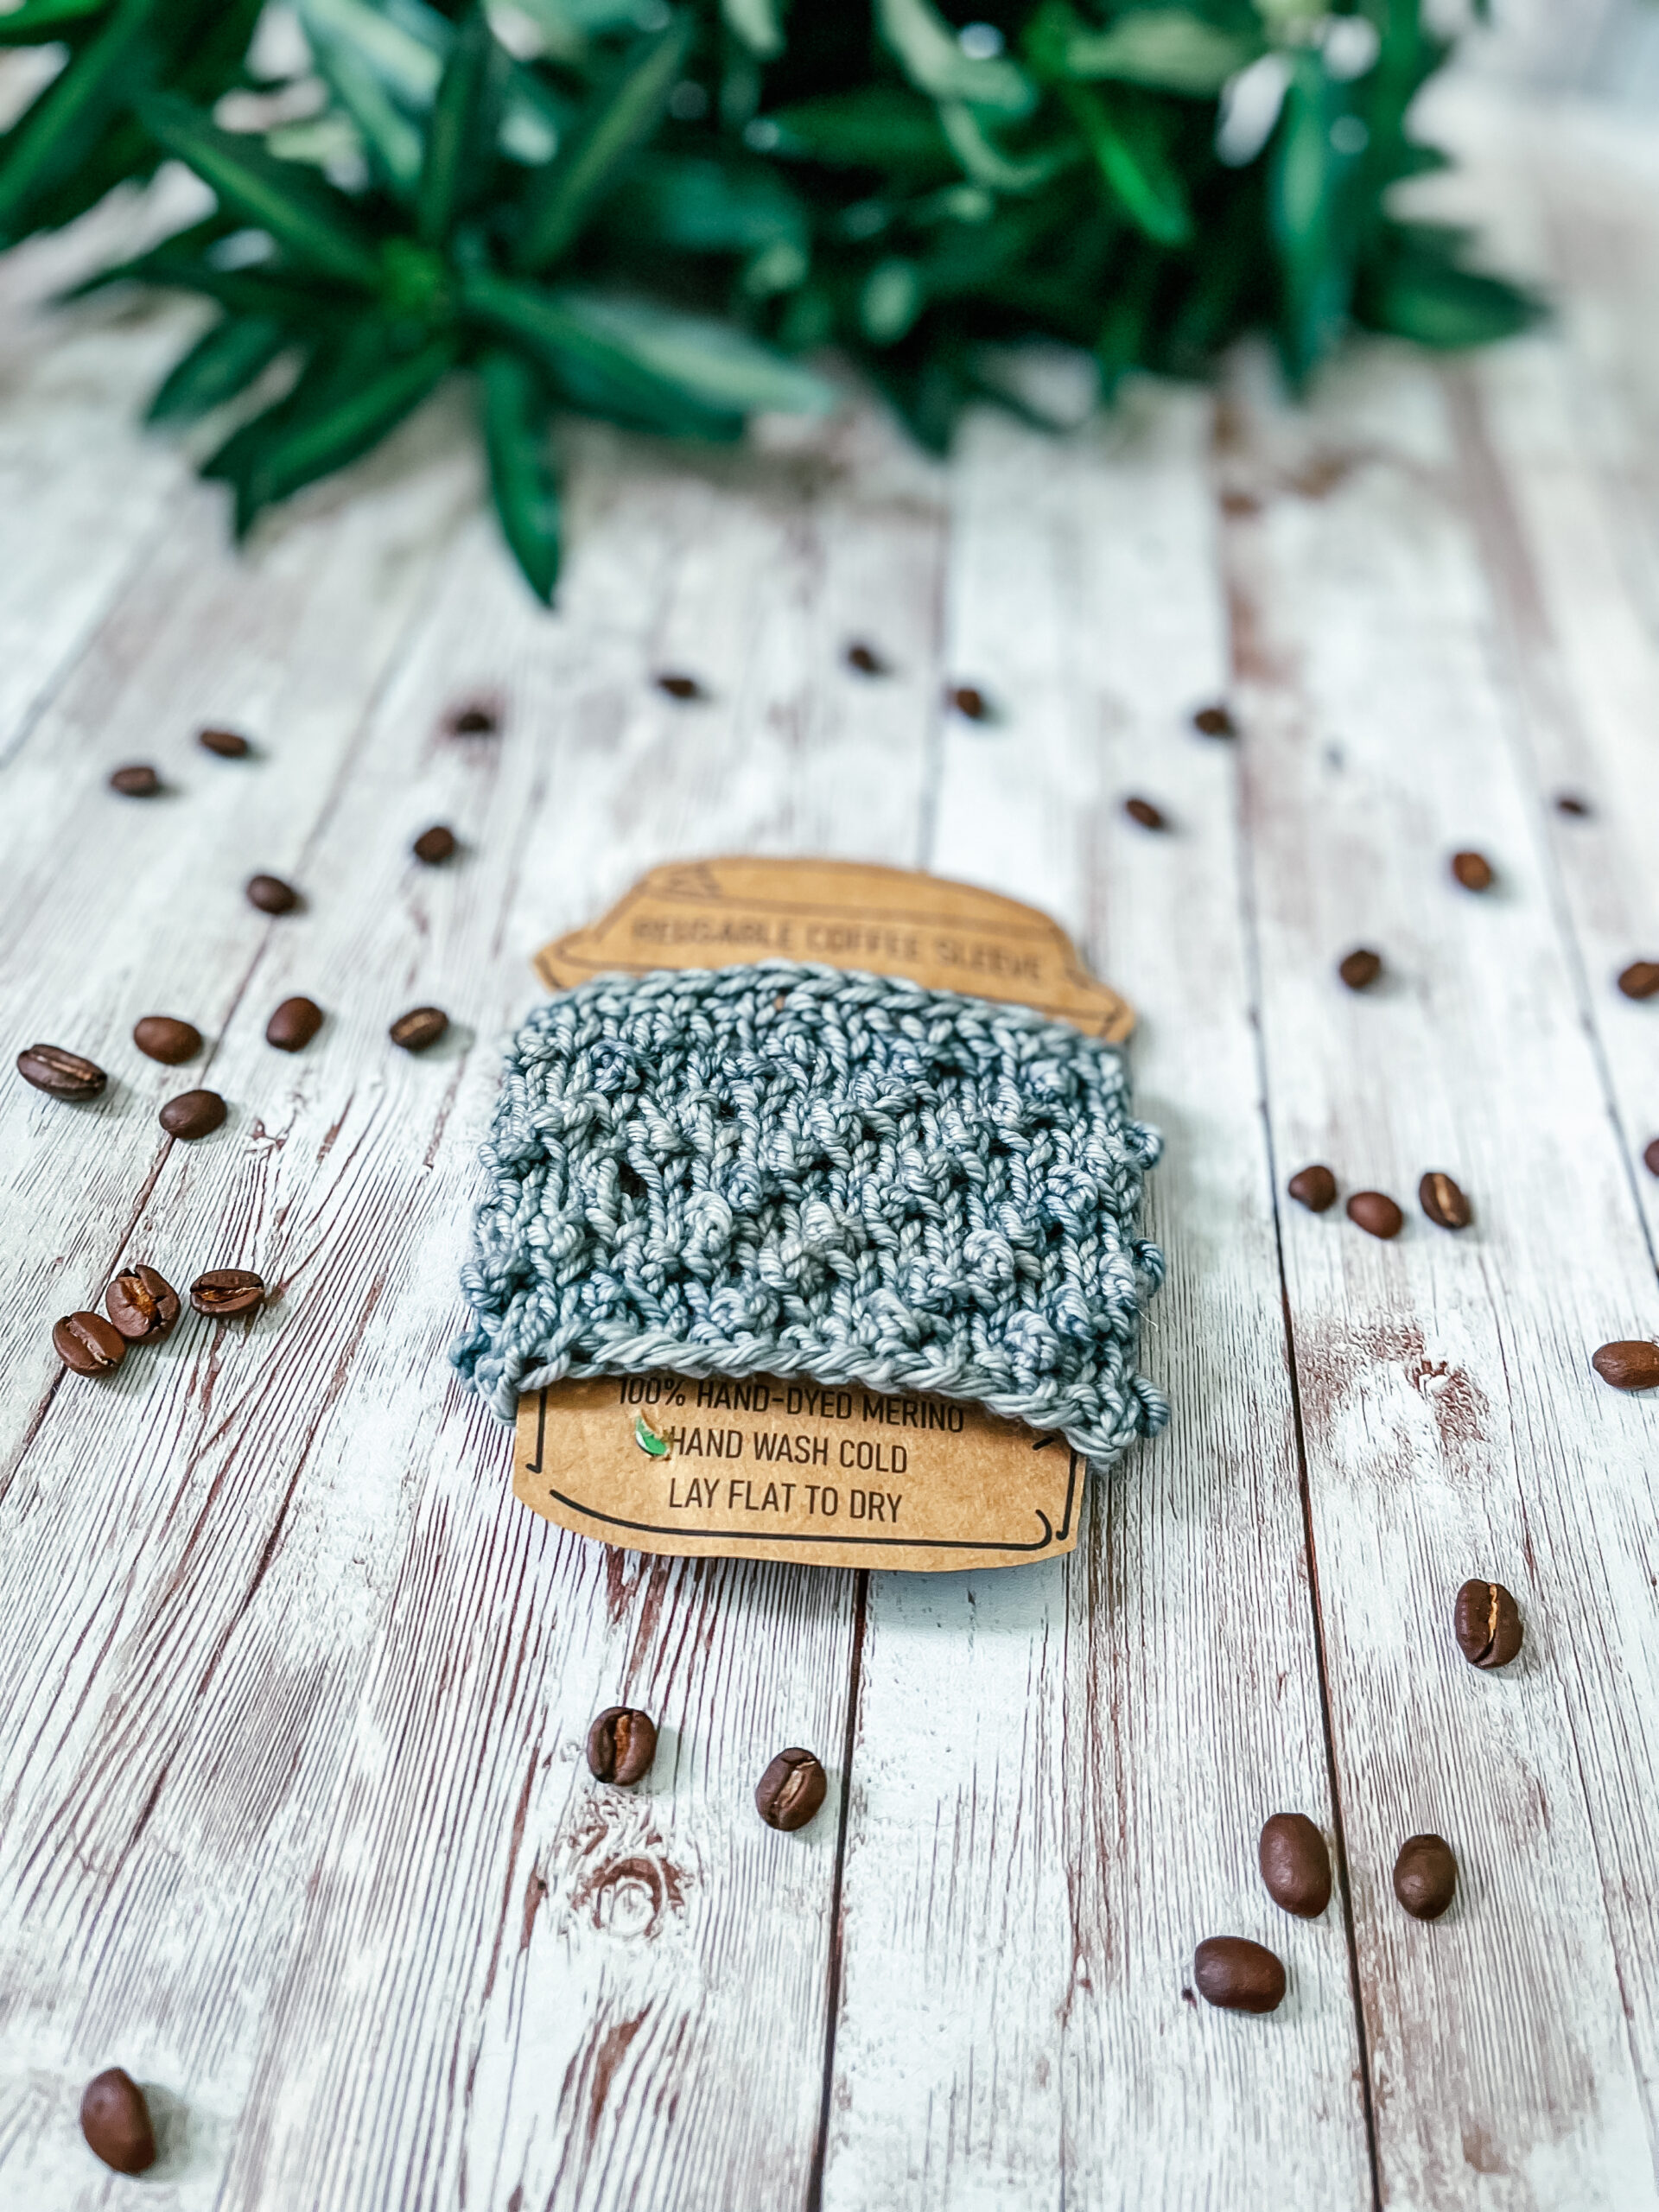 A light gray coffee sleeve is wrapped around a kraft paper image of a coffee cup. It rests on a wood plank, surrounded by scattered coffee beans and greenery in the background